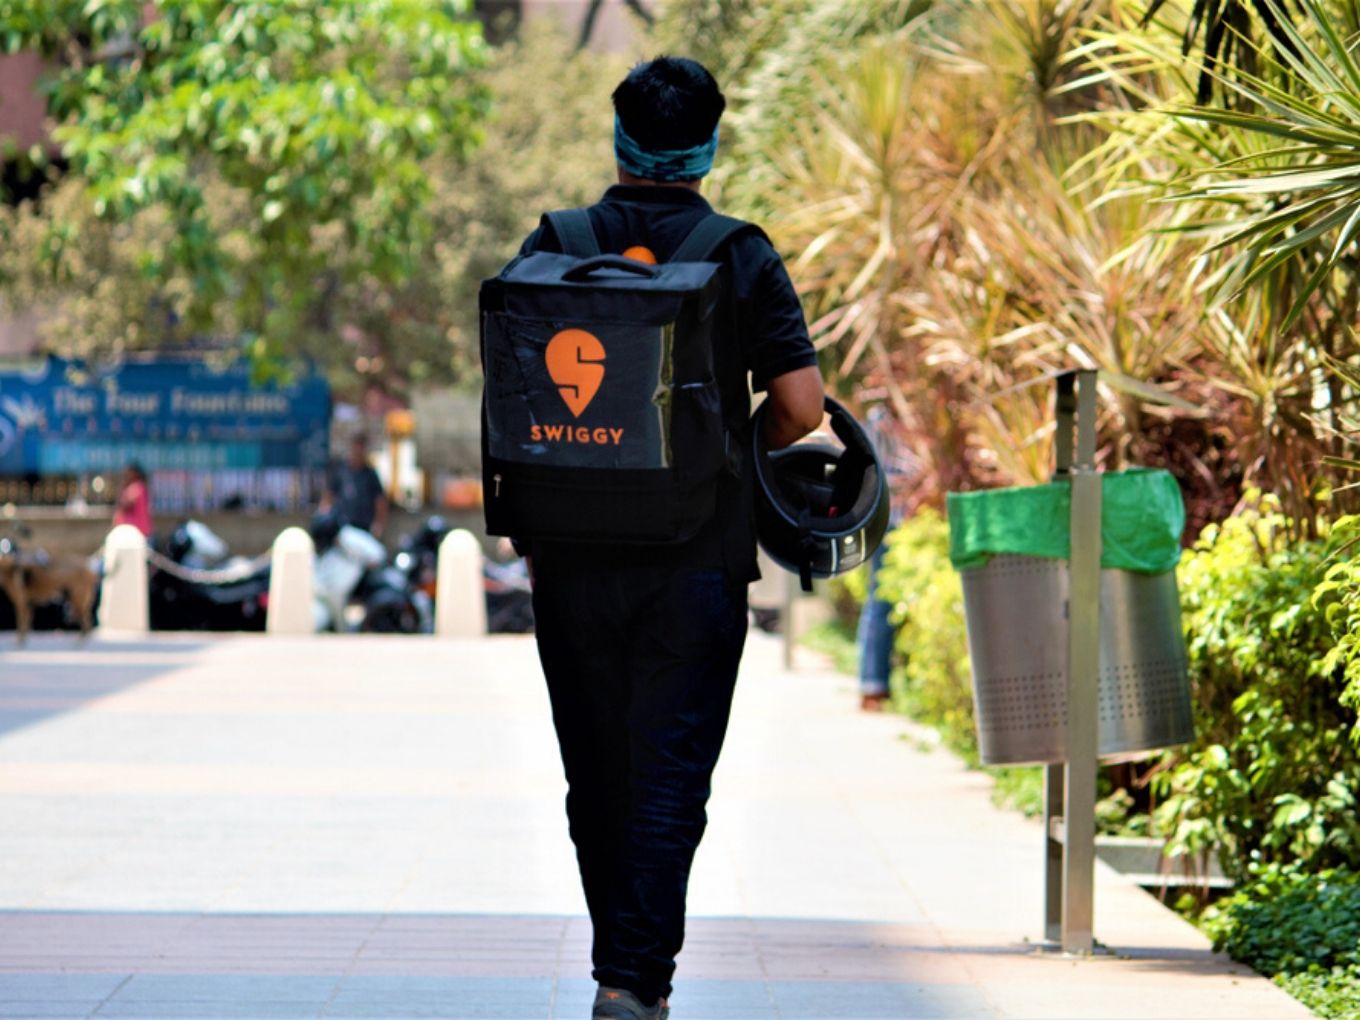 CCI Rejects Complaint Against Swiggy For Overpricing, Unfair Practices